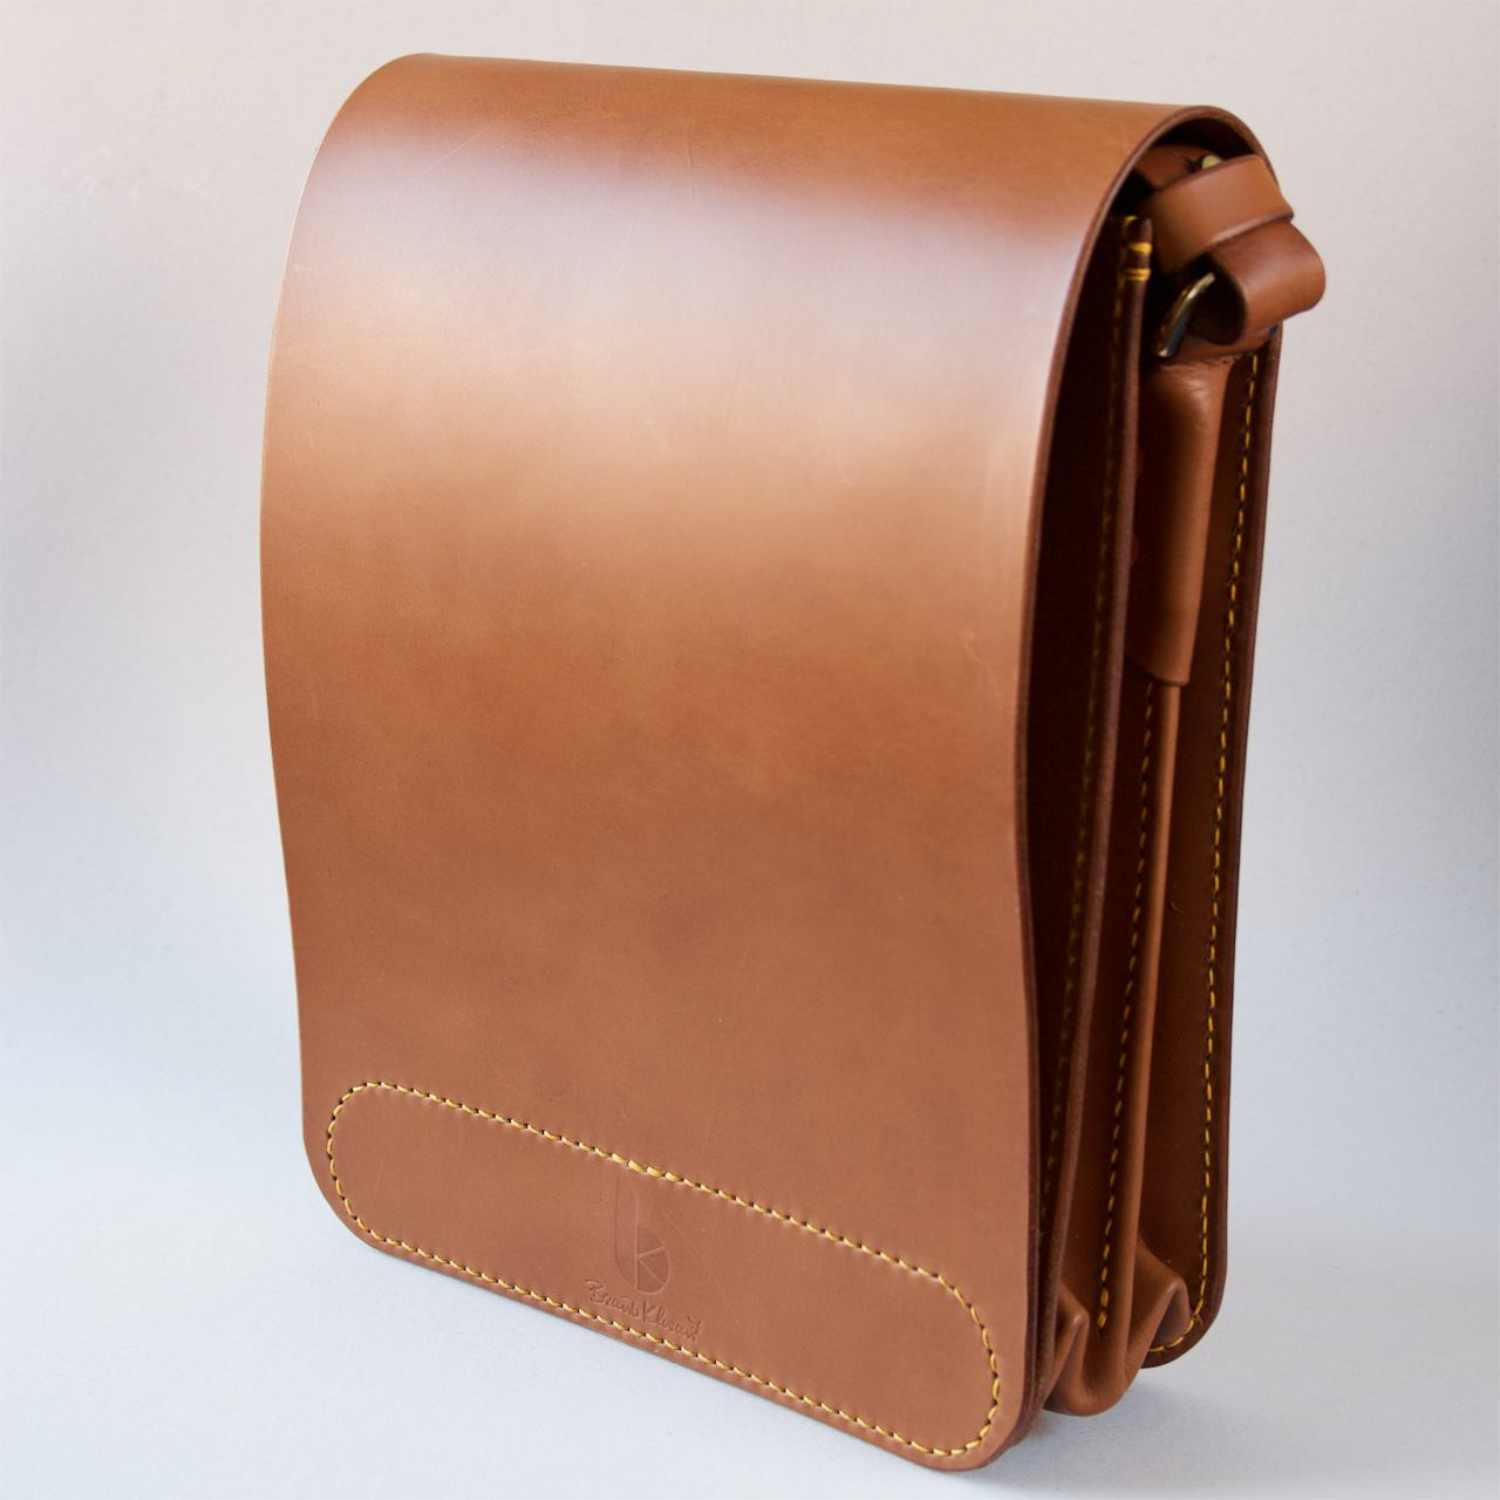 leather messenger bag with cover all flap